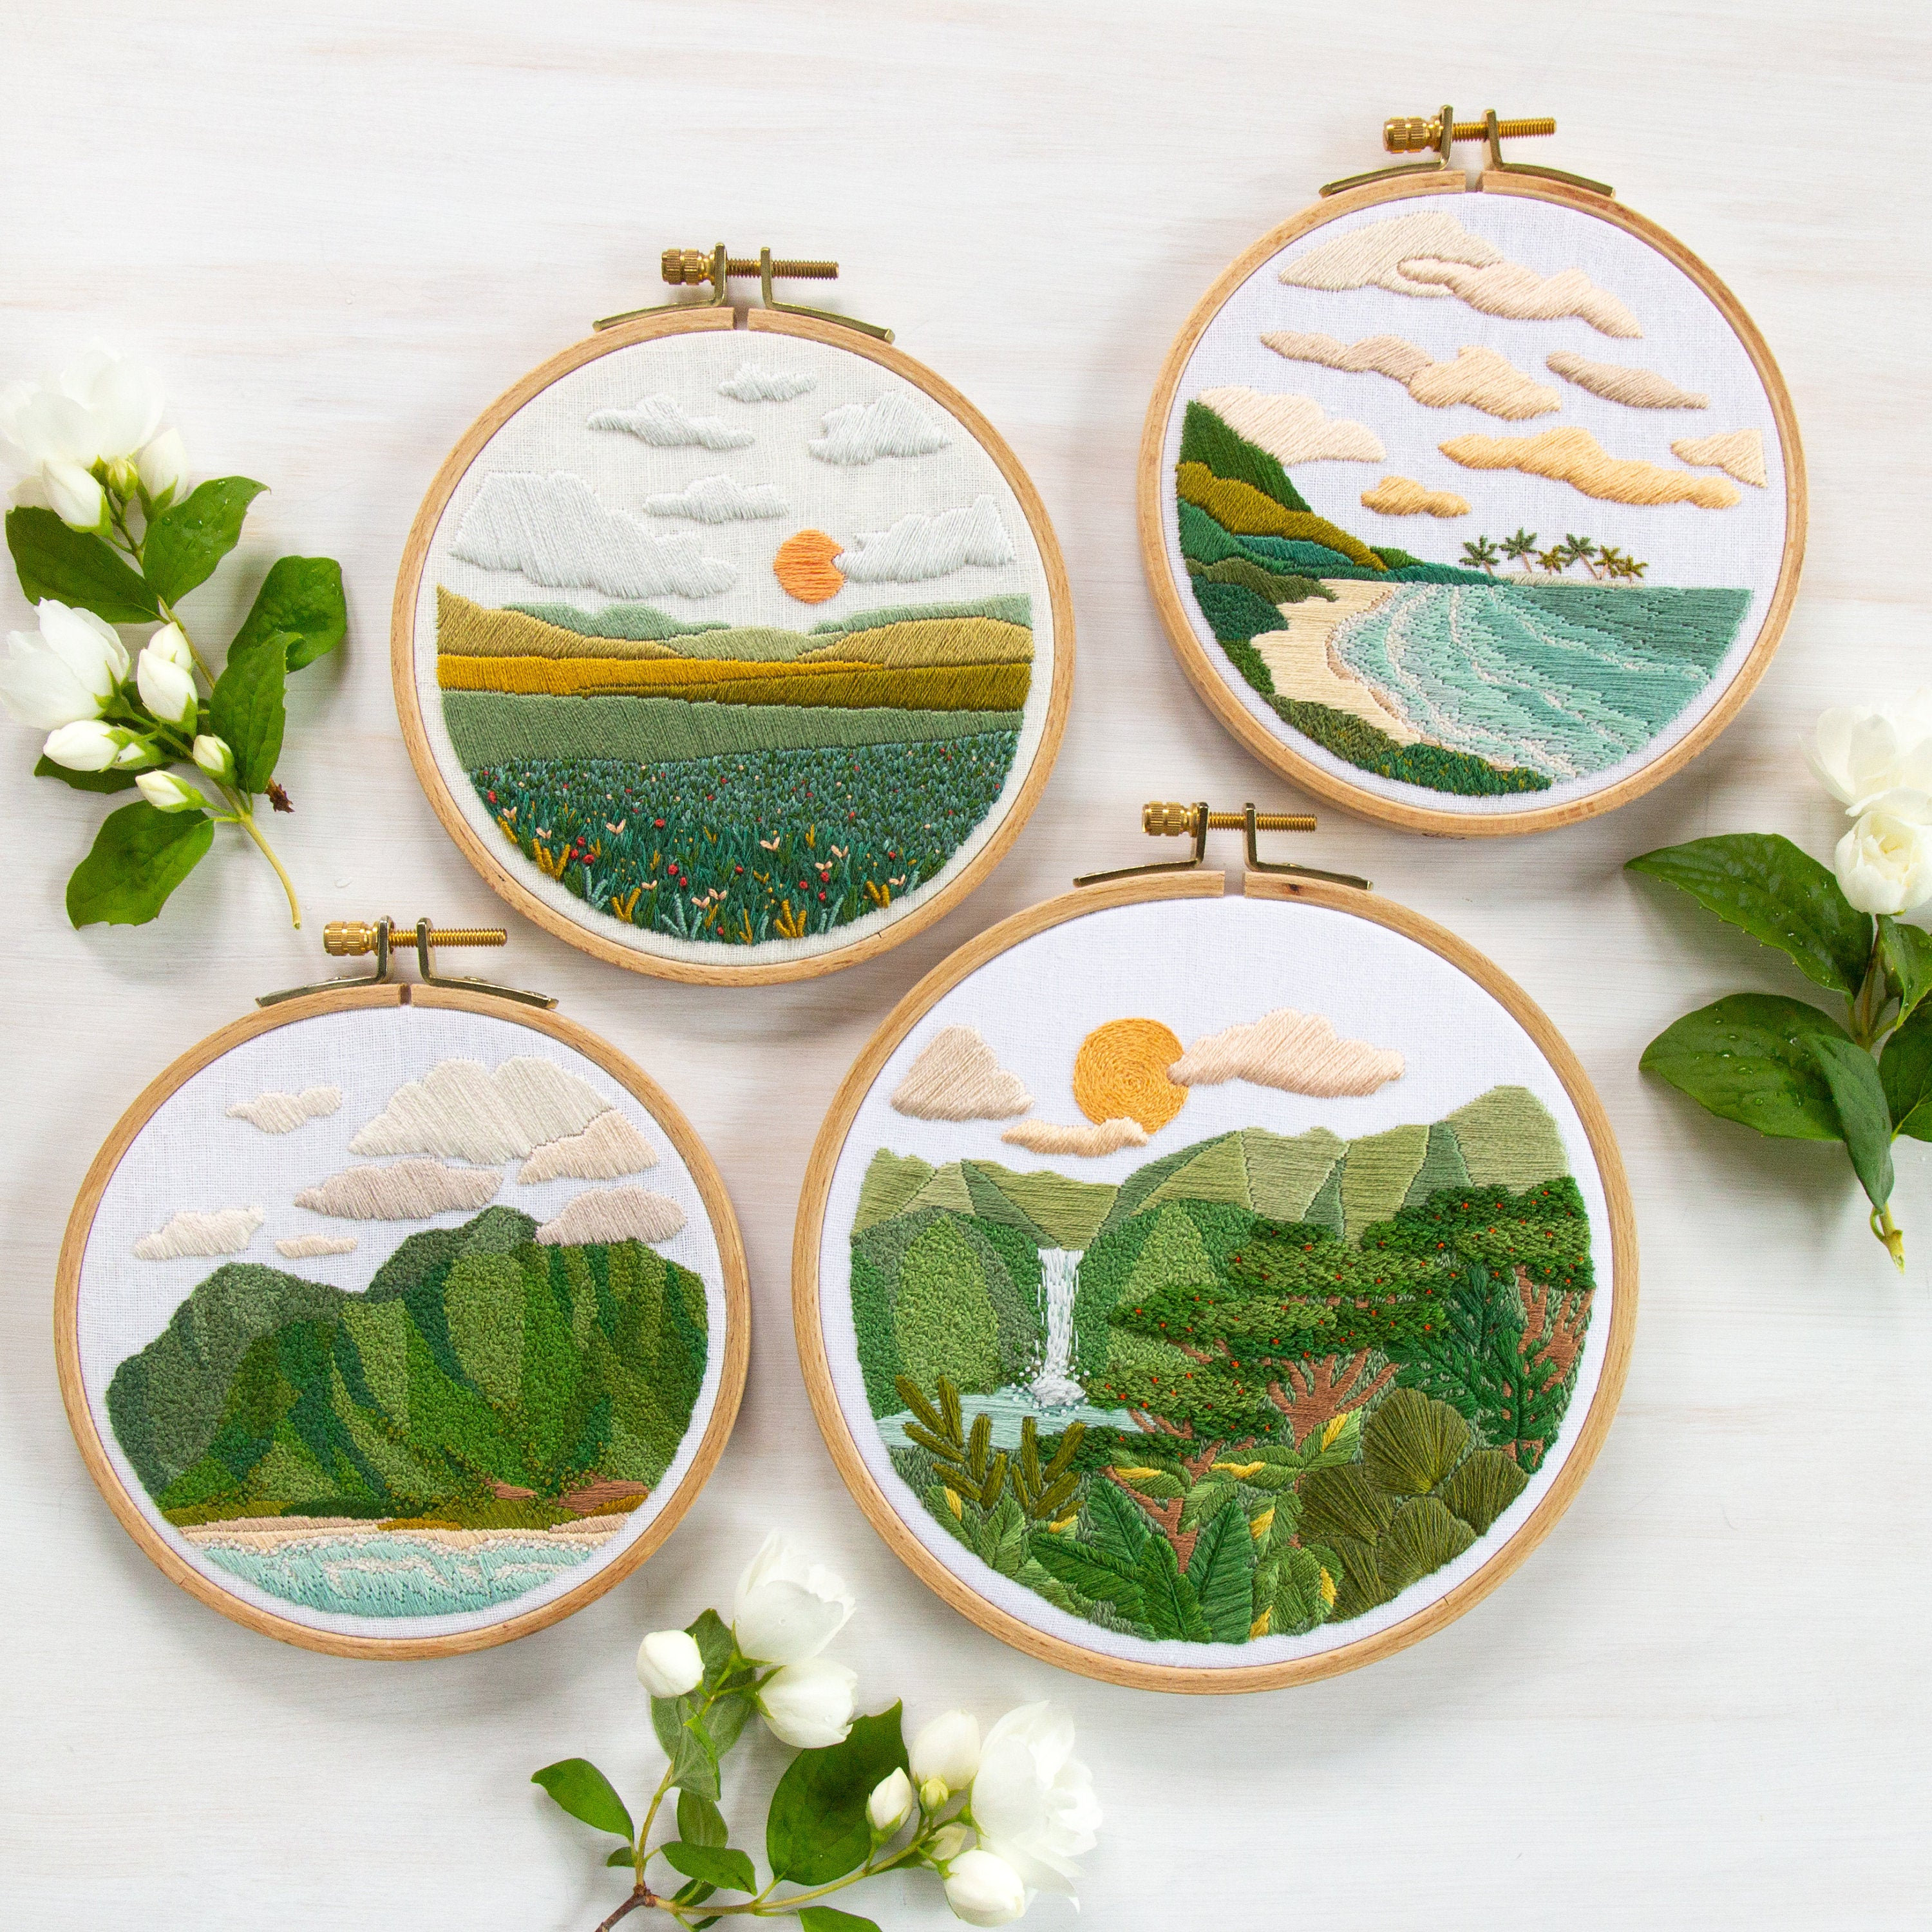 Coastal Formations Embroidery Kit. Geometric Embroidery Design